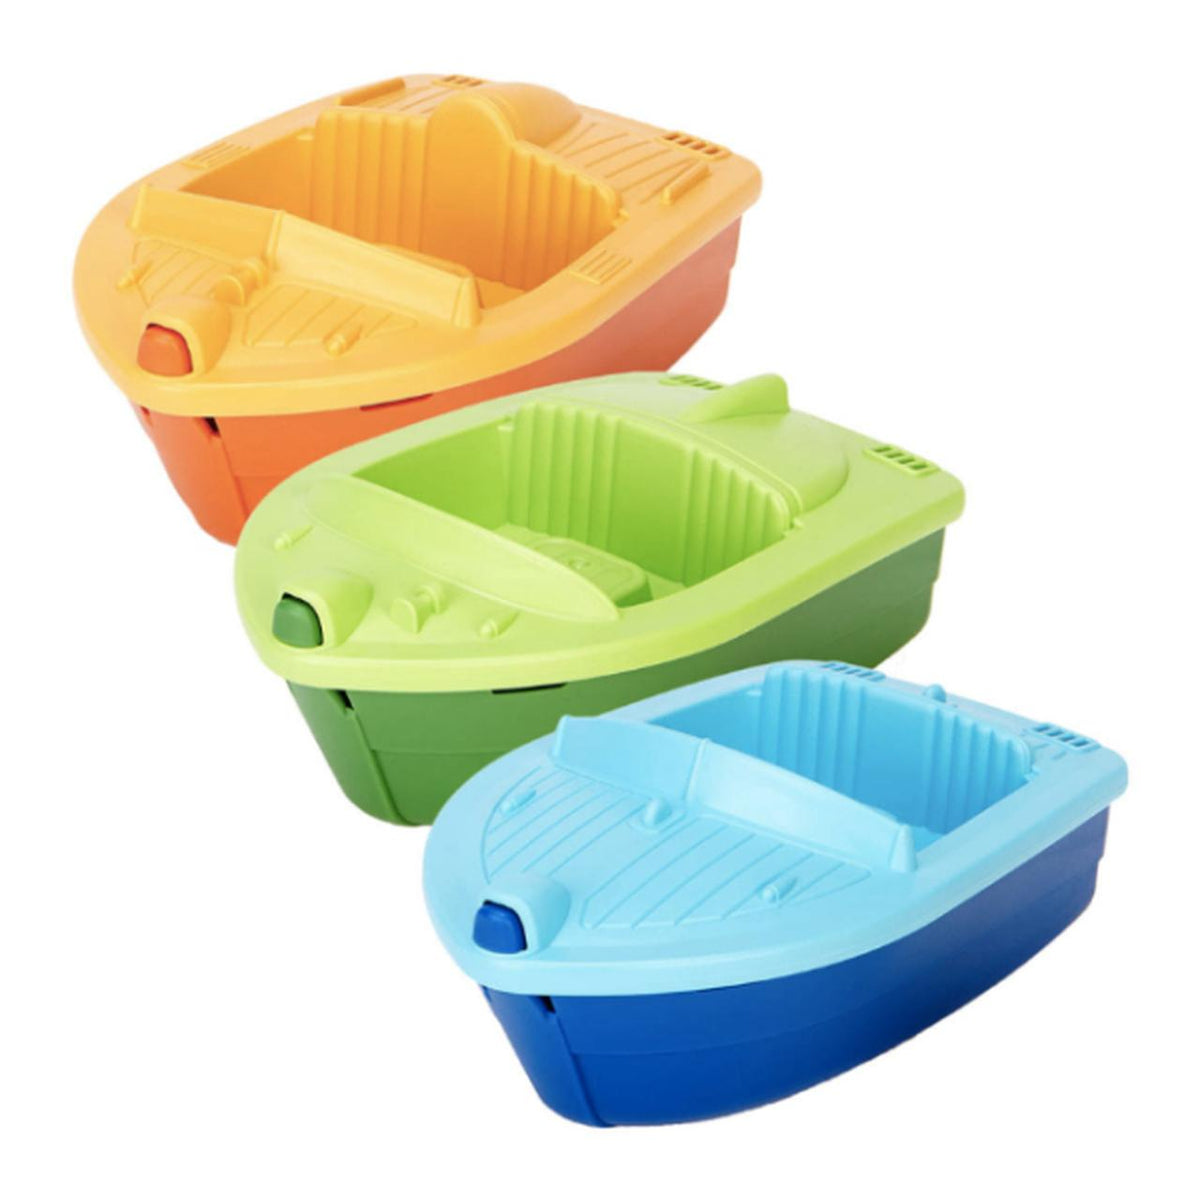 Sports Boats - Assorted (Green Toys)